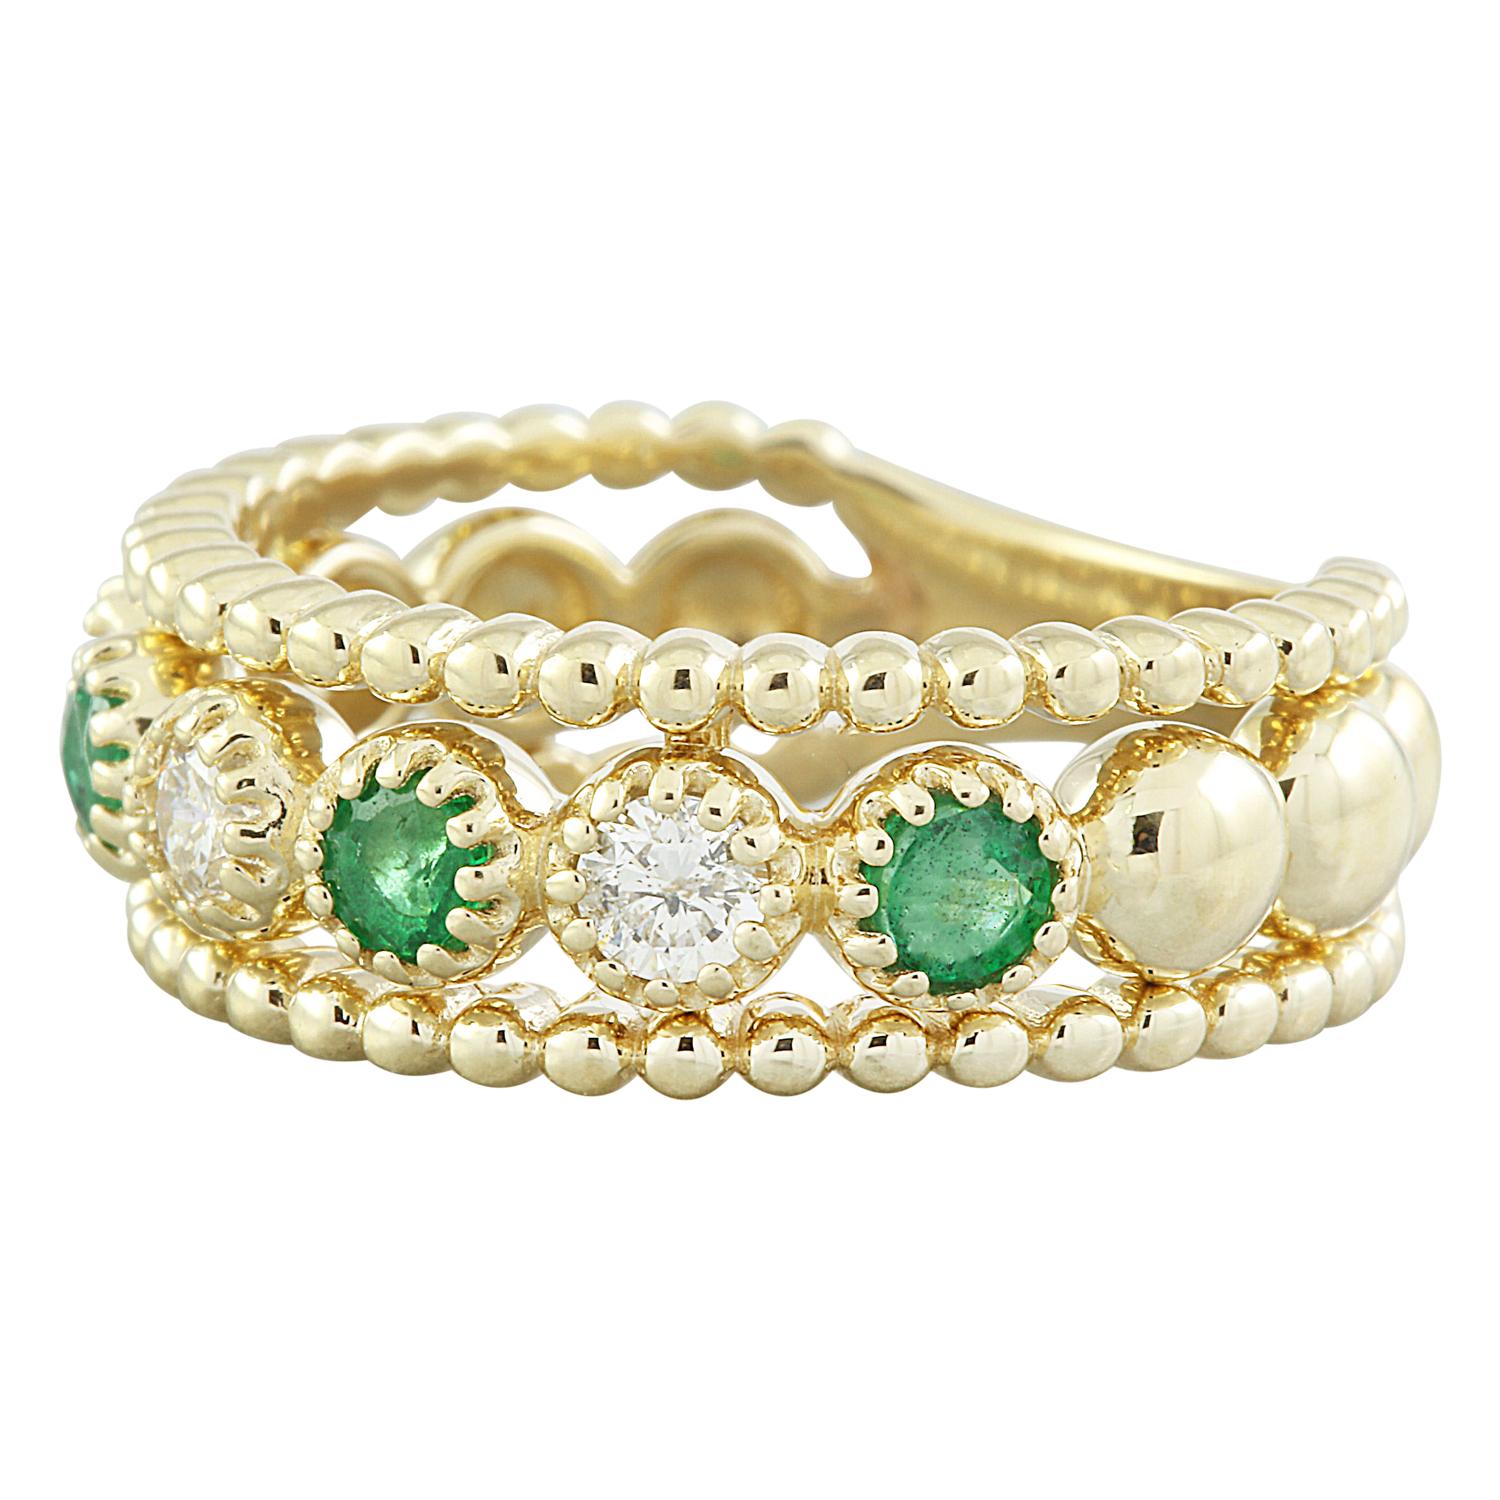 Introducing a timeless embodiment of elegance, this Natural Emerald Diamond Ring, delicately crafted in solid 14K Yellow Gold, is a celebration of refined beauty. With a total weight of 0.62 carats, this ring exudes sophistication and charm,